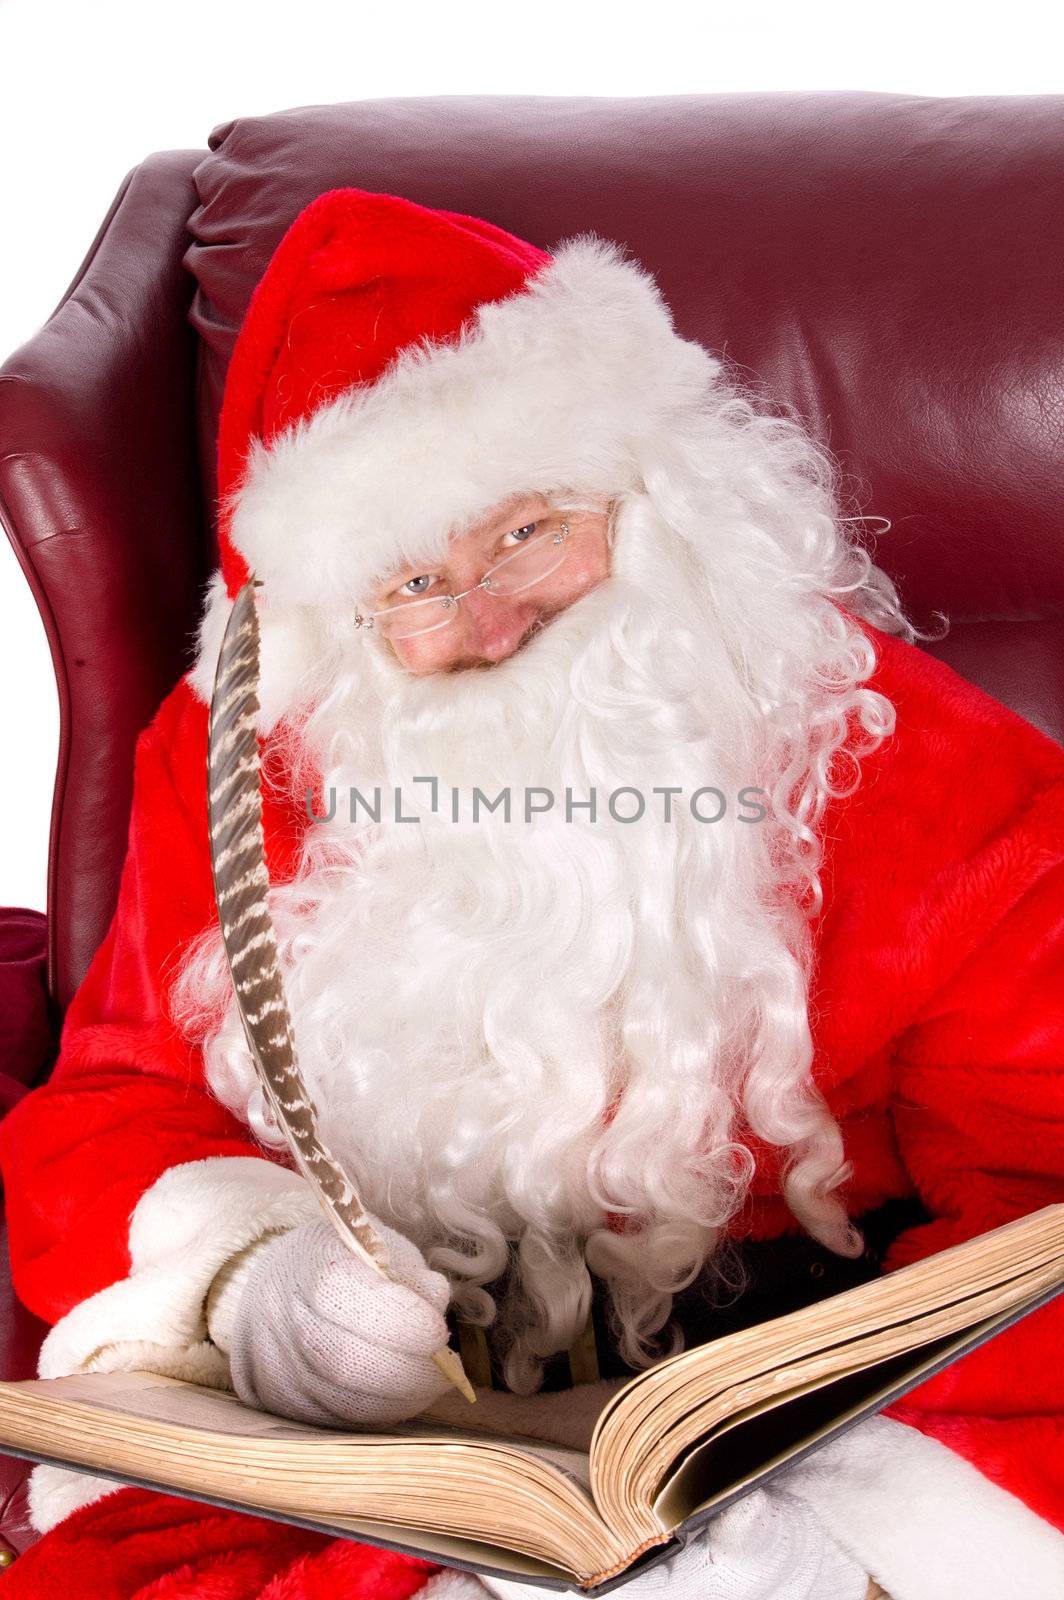 Santa writing in the book of names of good children by jeffbanke